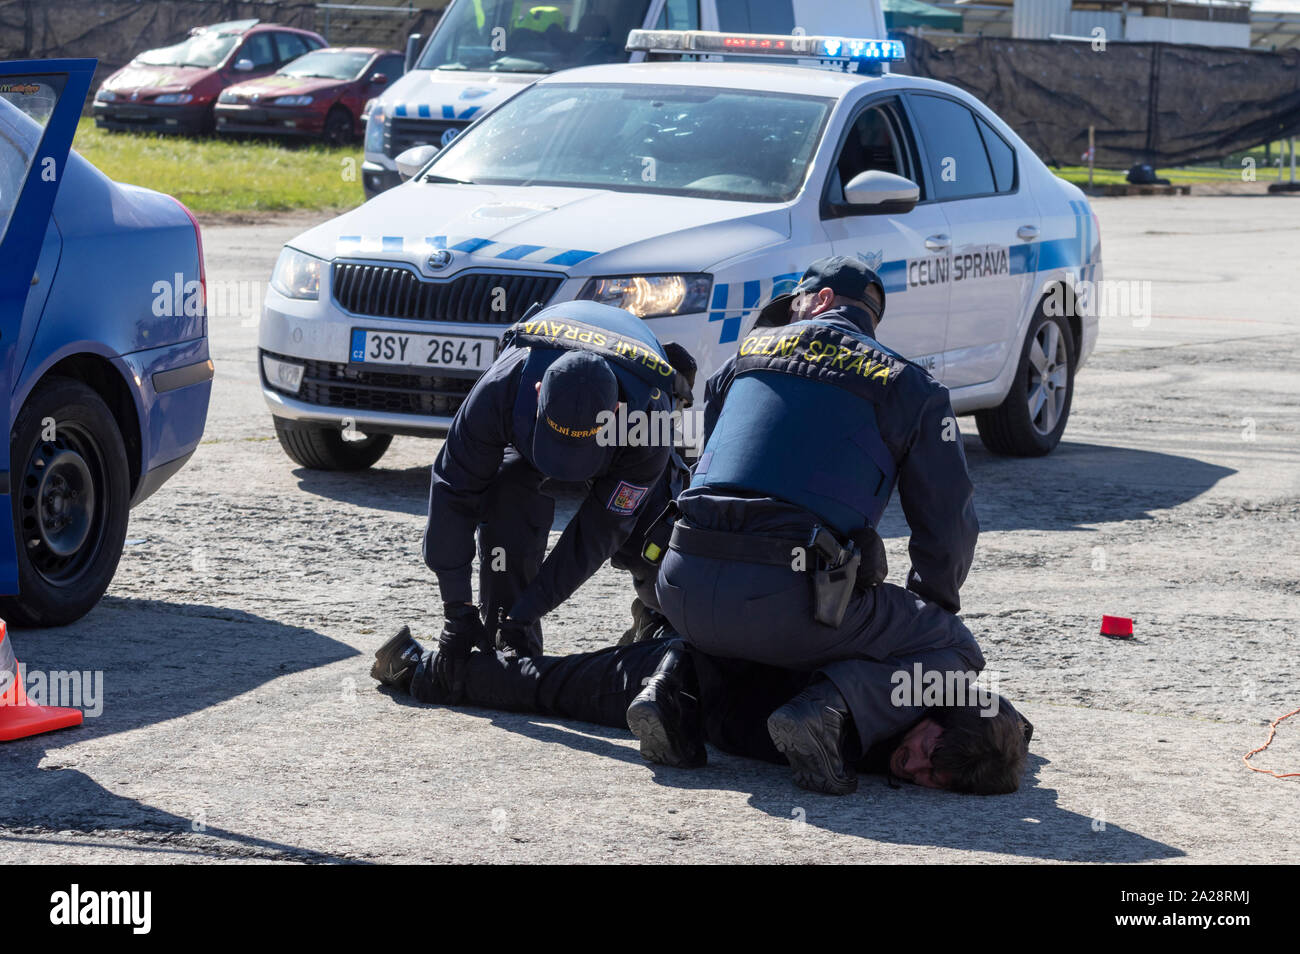 OSTRAVA, CZECH REPUBLIC - SEPTEMBER 21, 2019: NATO Days. Dynamic display of Czech police force, suspect pulled over and arrested. Stock Photo